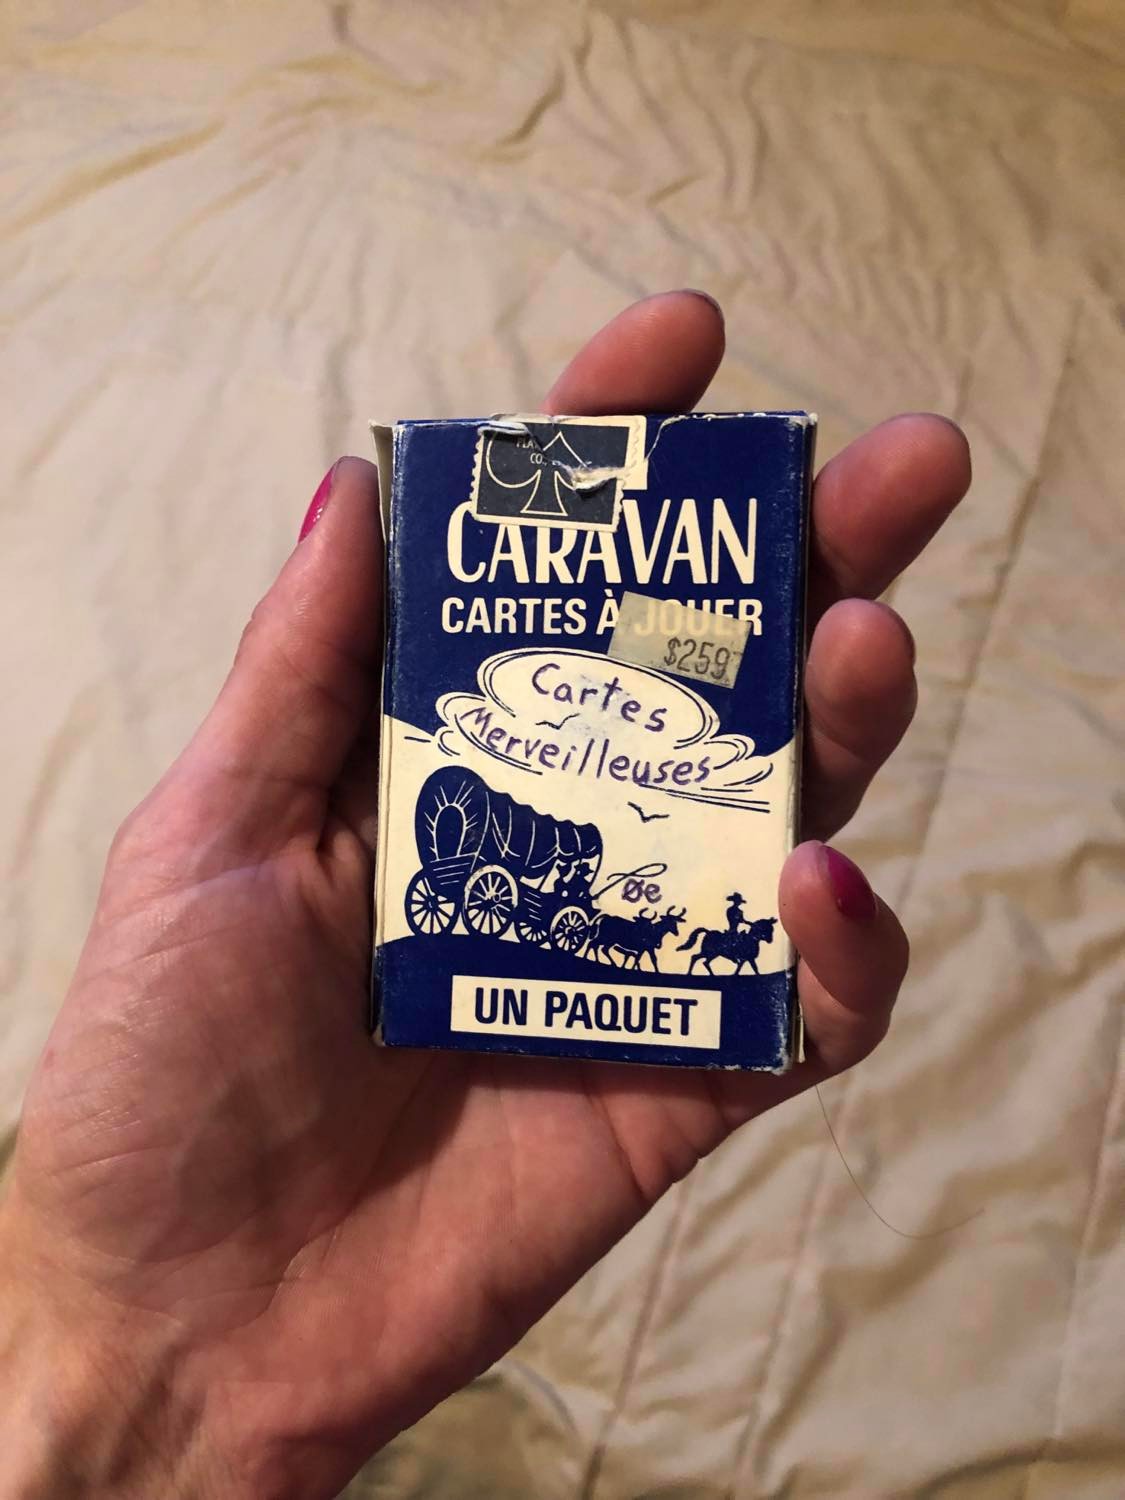 The back of the box, showing it in French. It reads caravan, cartes a jouer, and the second half of the original sealing sticker, aged and worn, partially obscures it. The same covered wagon and oxen are there, and the clouds read Cartes Merveilleuses. '0e' is above the oxen, and it states itself as un paquet.